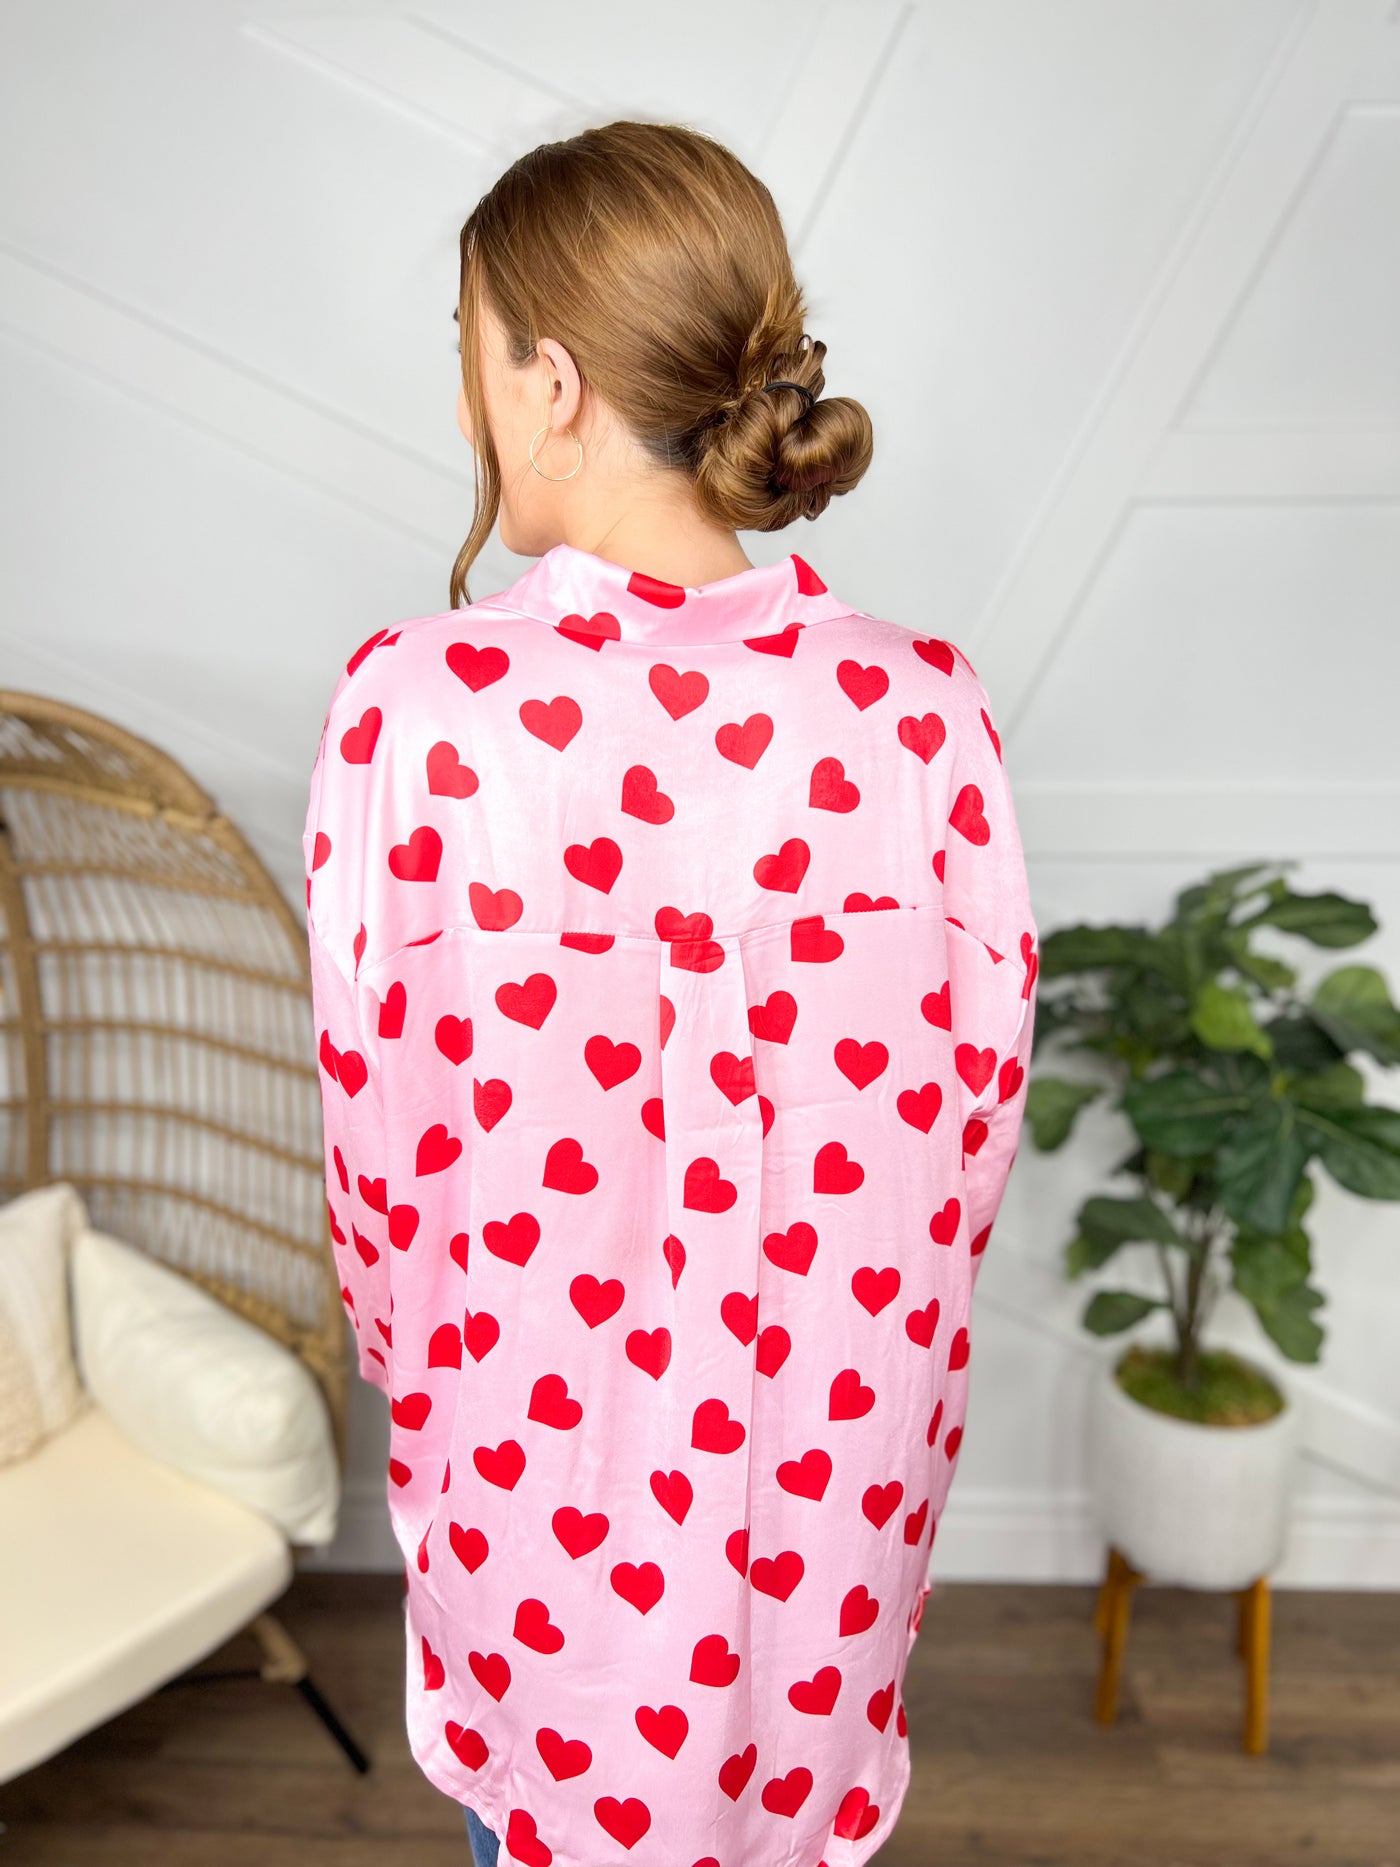 Kathryn Red Hearts Button Up Top